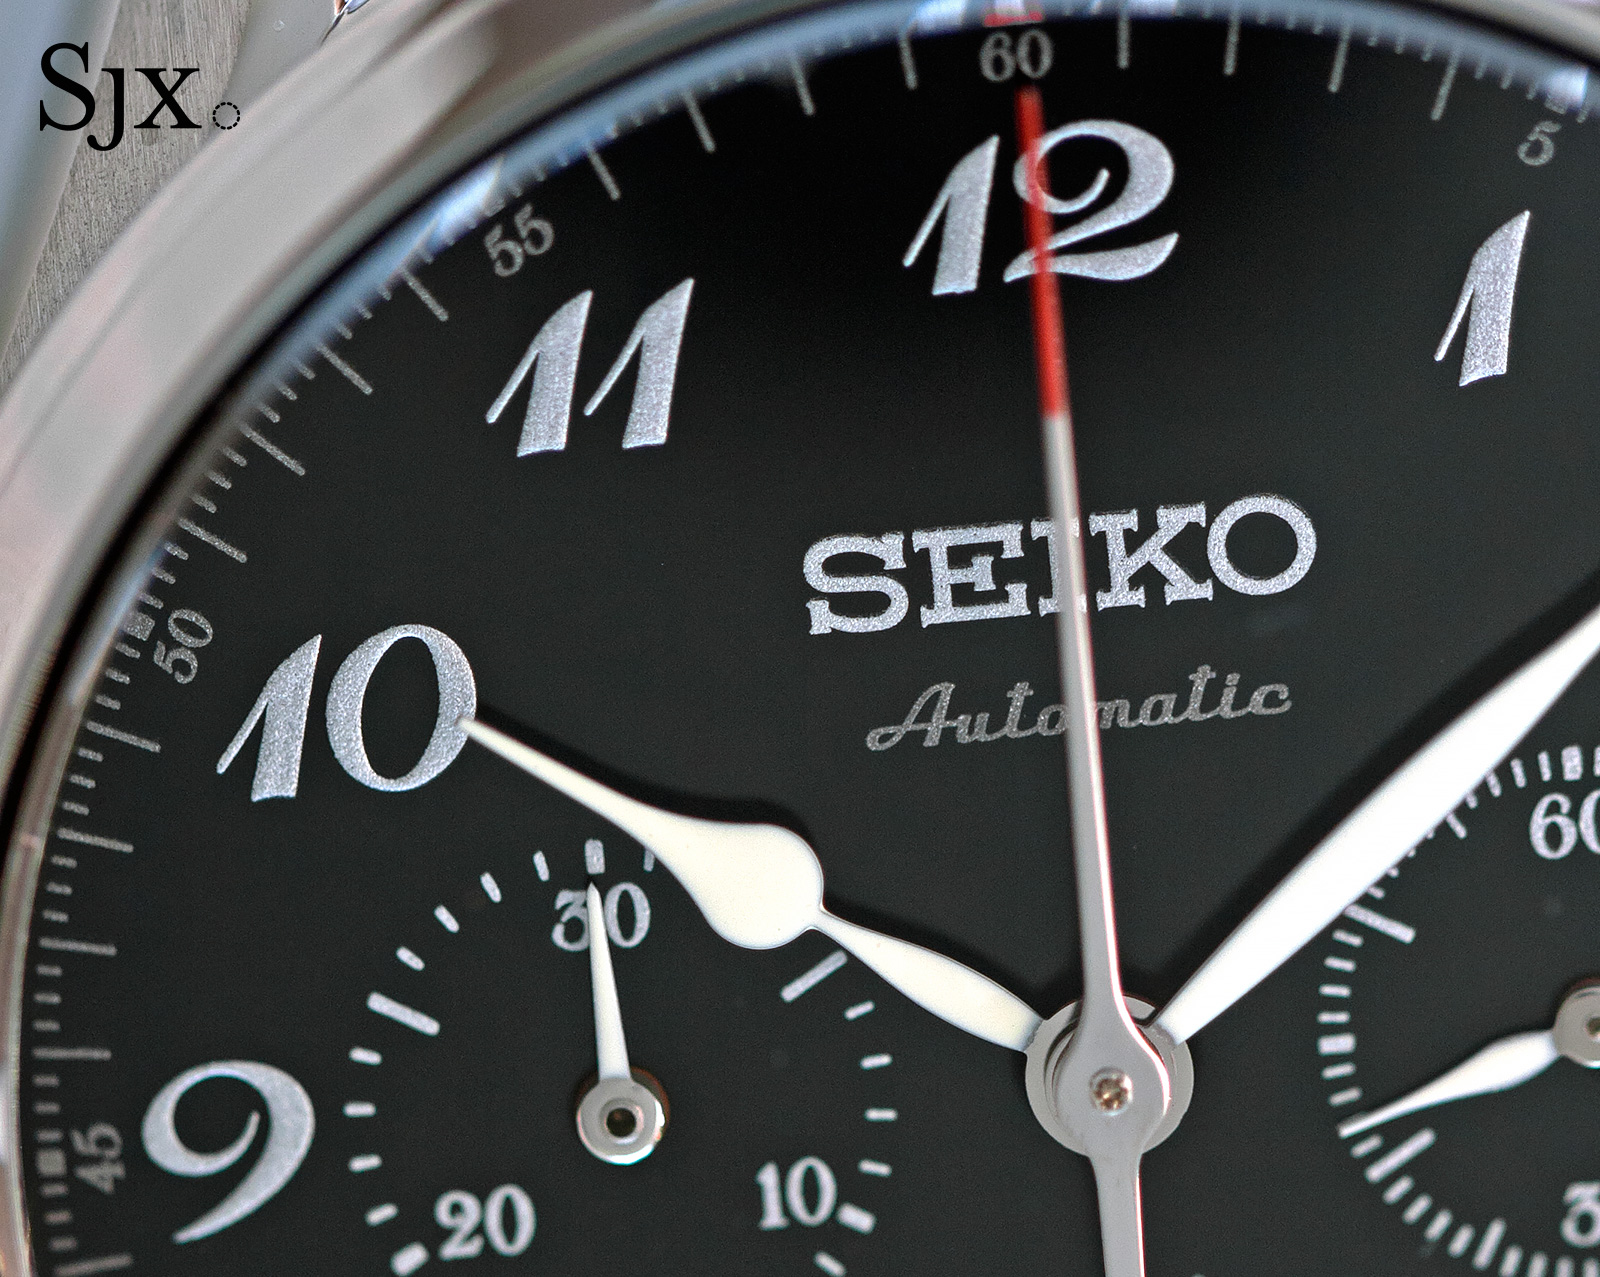 Hands-On with the Seiko Presage 60th Anniversary Chronographs in Enamel and  Urushi Lacquer | SJX Watches